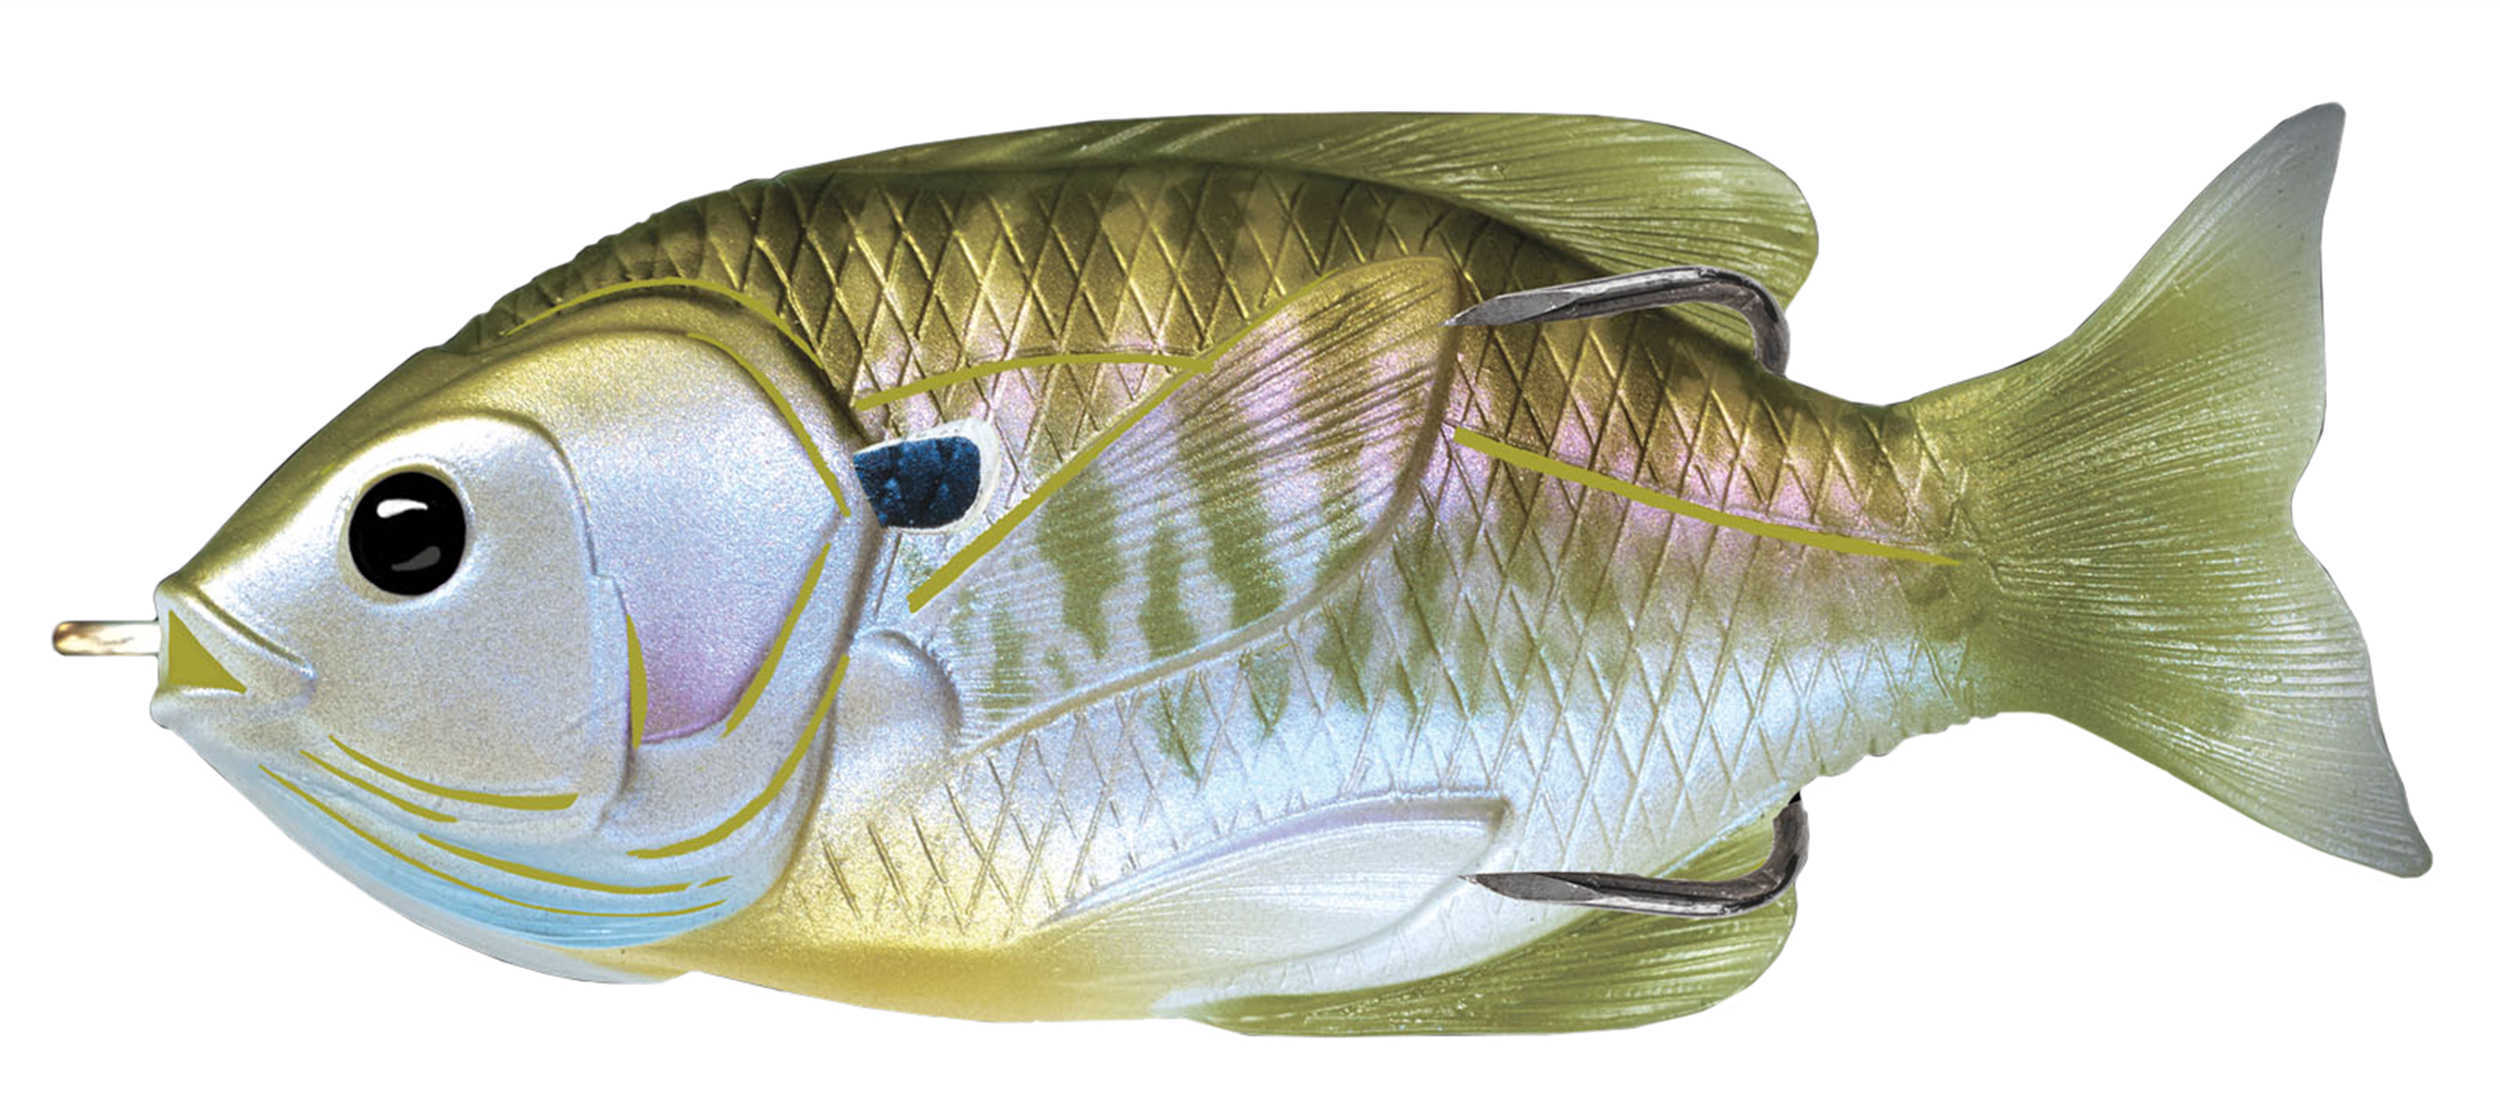 LiveTarget Lures Sunfish Hollow Body Freshwater, 4" Length, 3/4 oz, Topwater Depth, Natural Olive Bluegill, Per 1 Md: SF